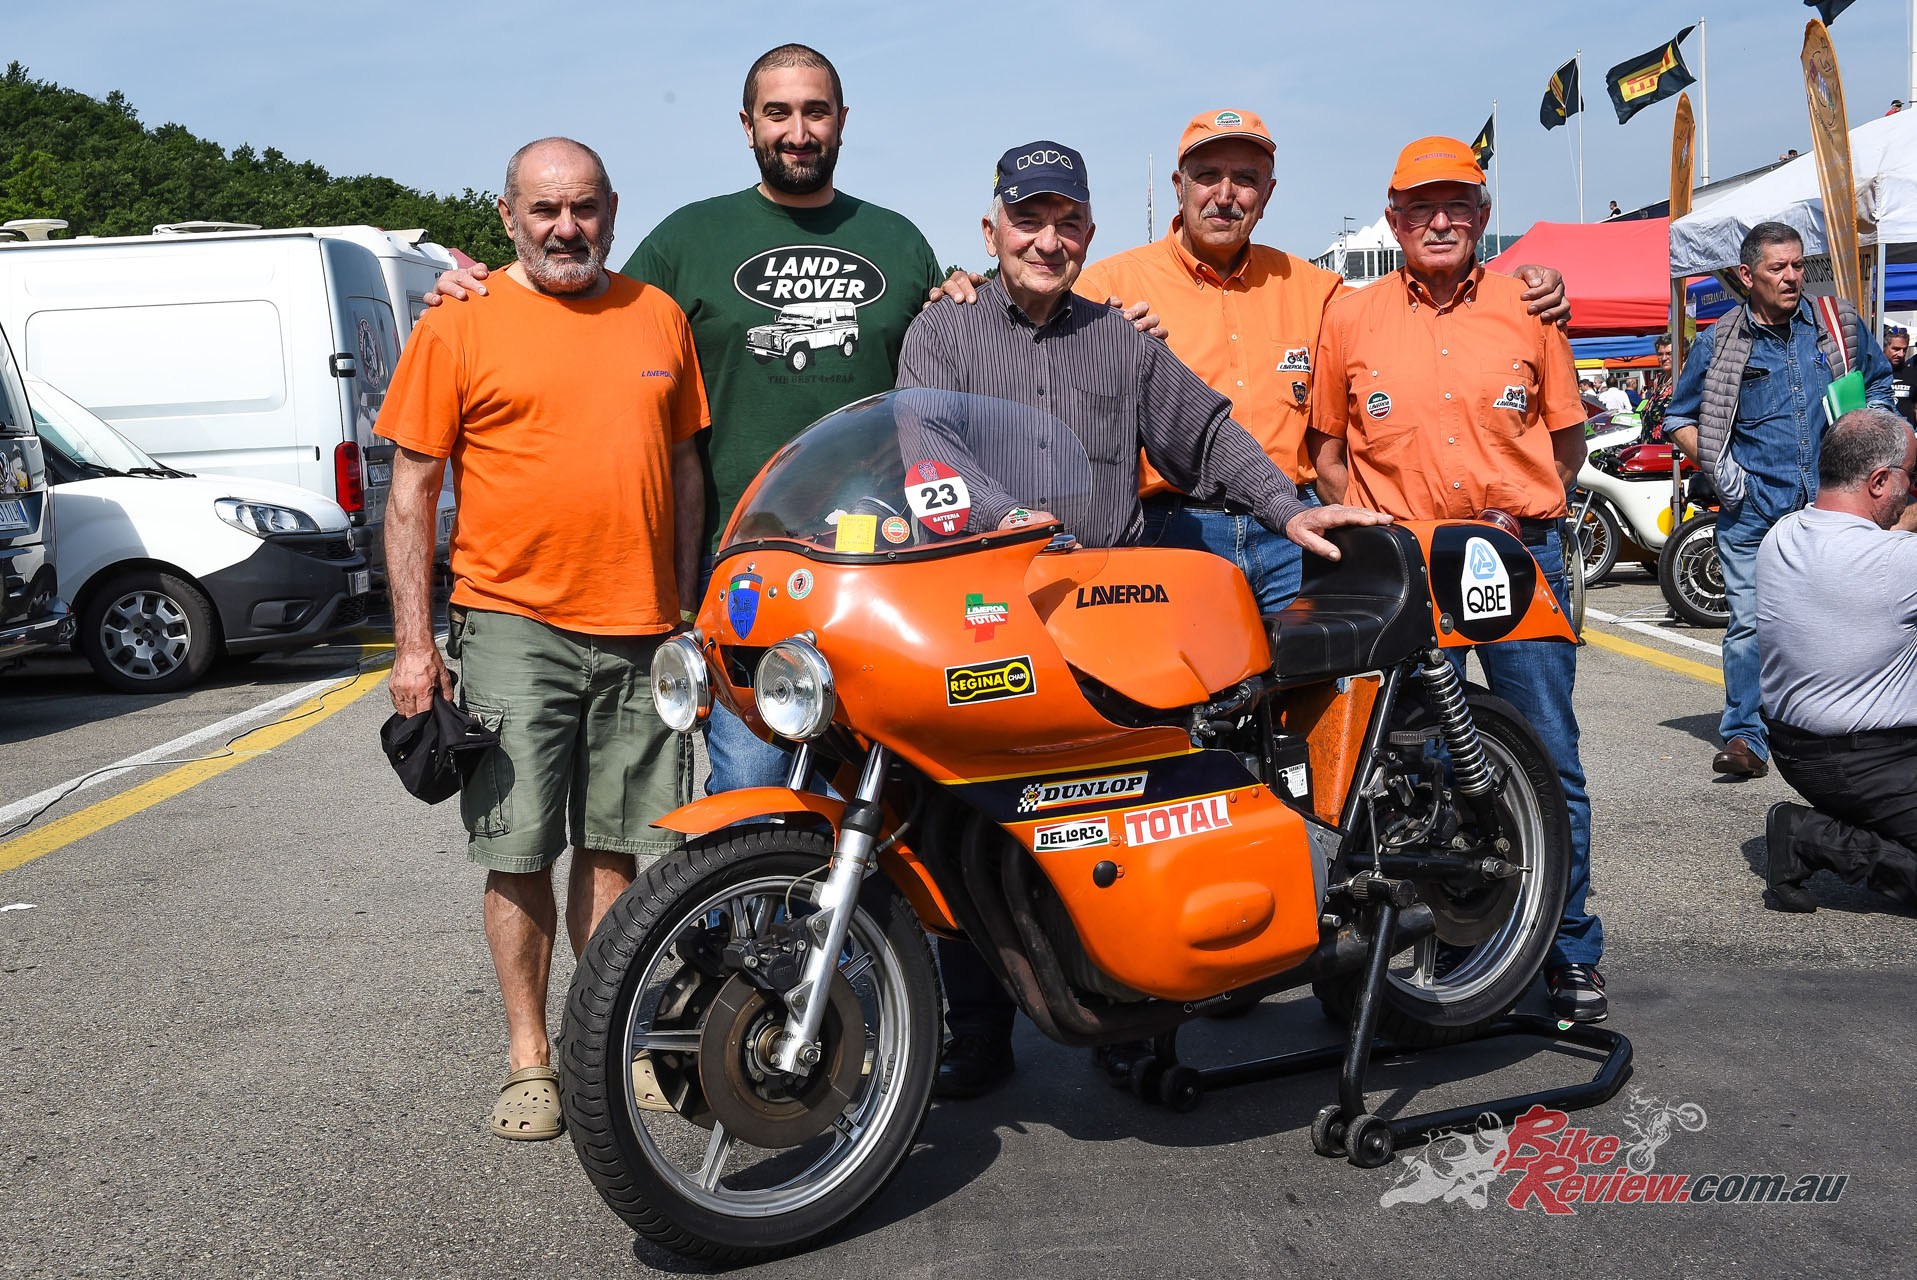 Piero still looks after a lot of the old Laverda racers! Ensuring they're out there flying he orange flag at classic race meetings.